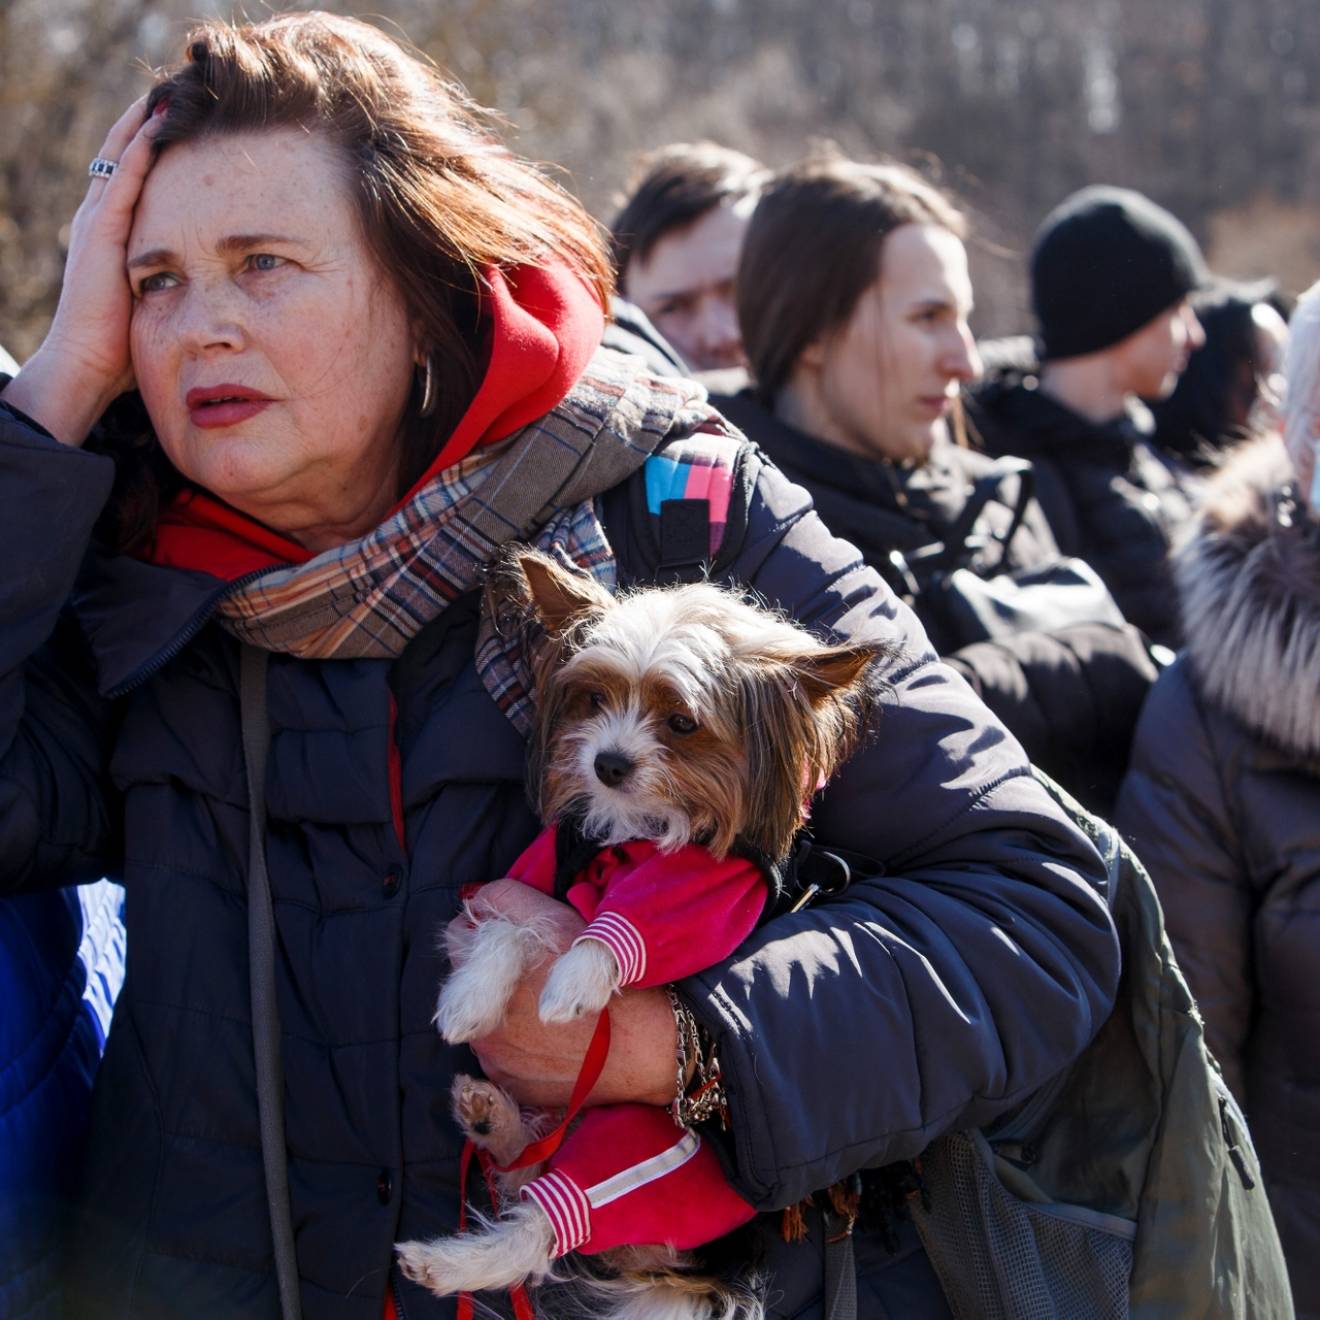 A group of Ukrainian refugees standing outside in winter coats, a middle-aged woman holding a small dog in front